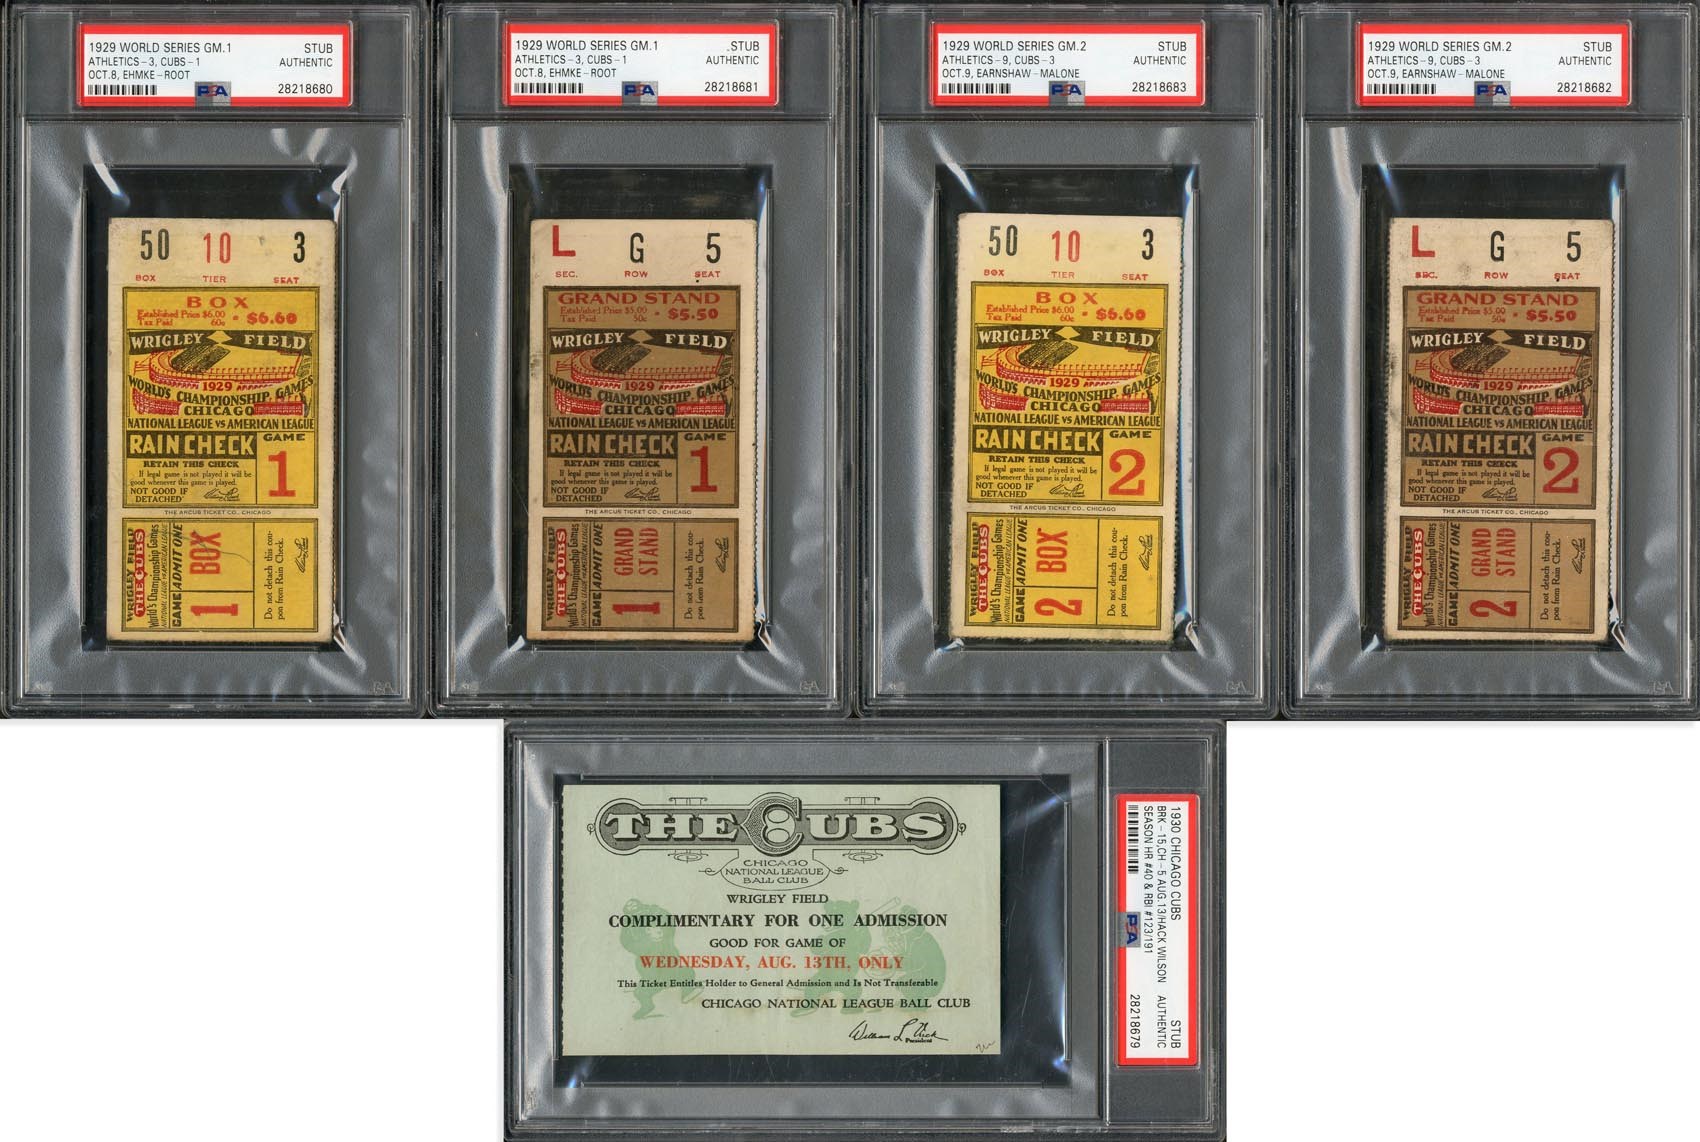 - 1929 Cubs World Series Ticket Stub Collection (5)